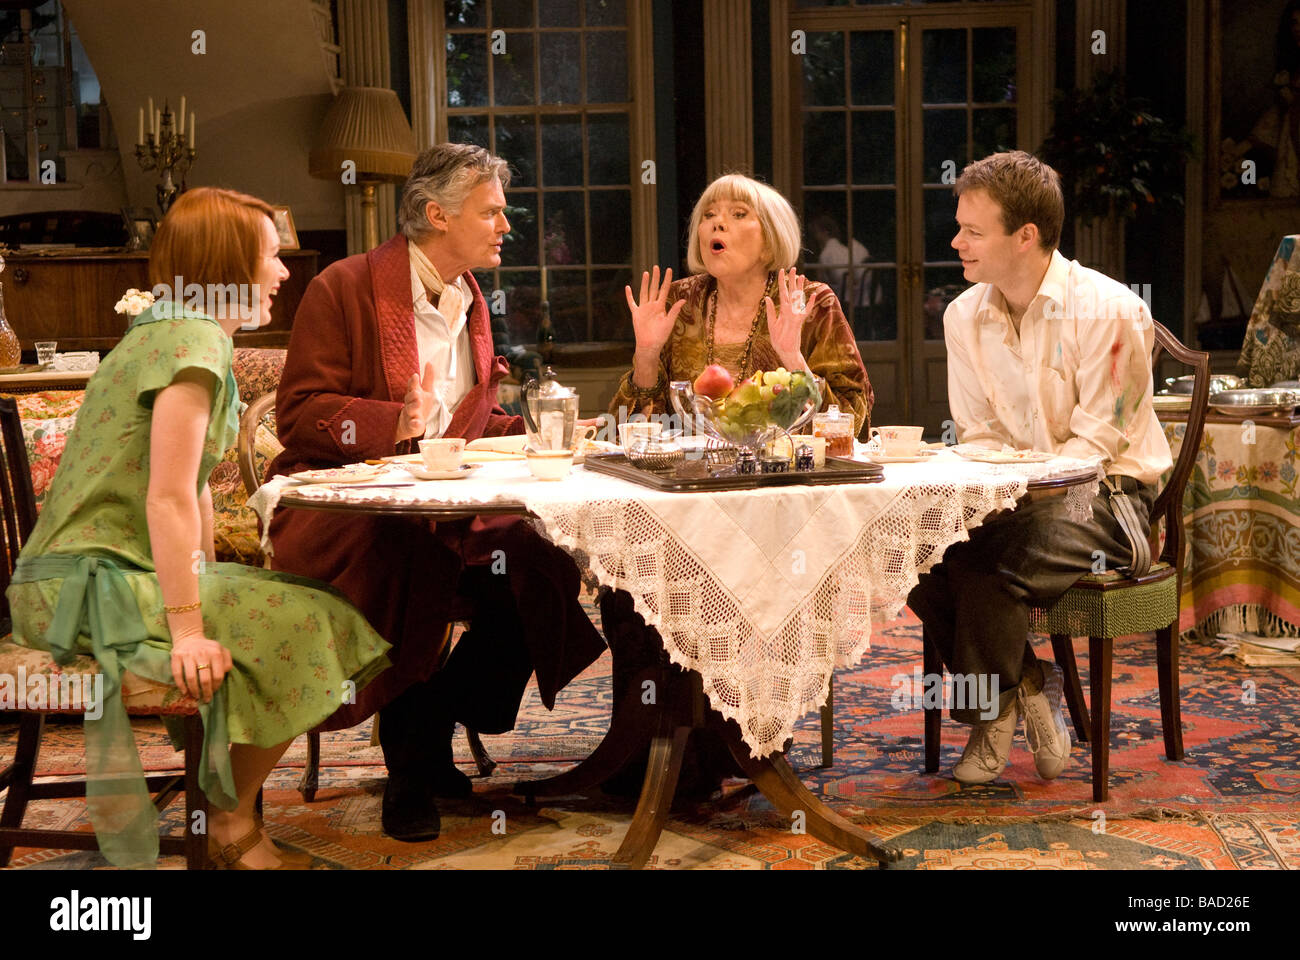 Scene from the play Hay Fever by Noel Coward, Chichester Festival Theatre, UK April 2009. Stock Photo